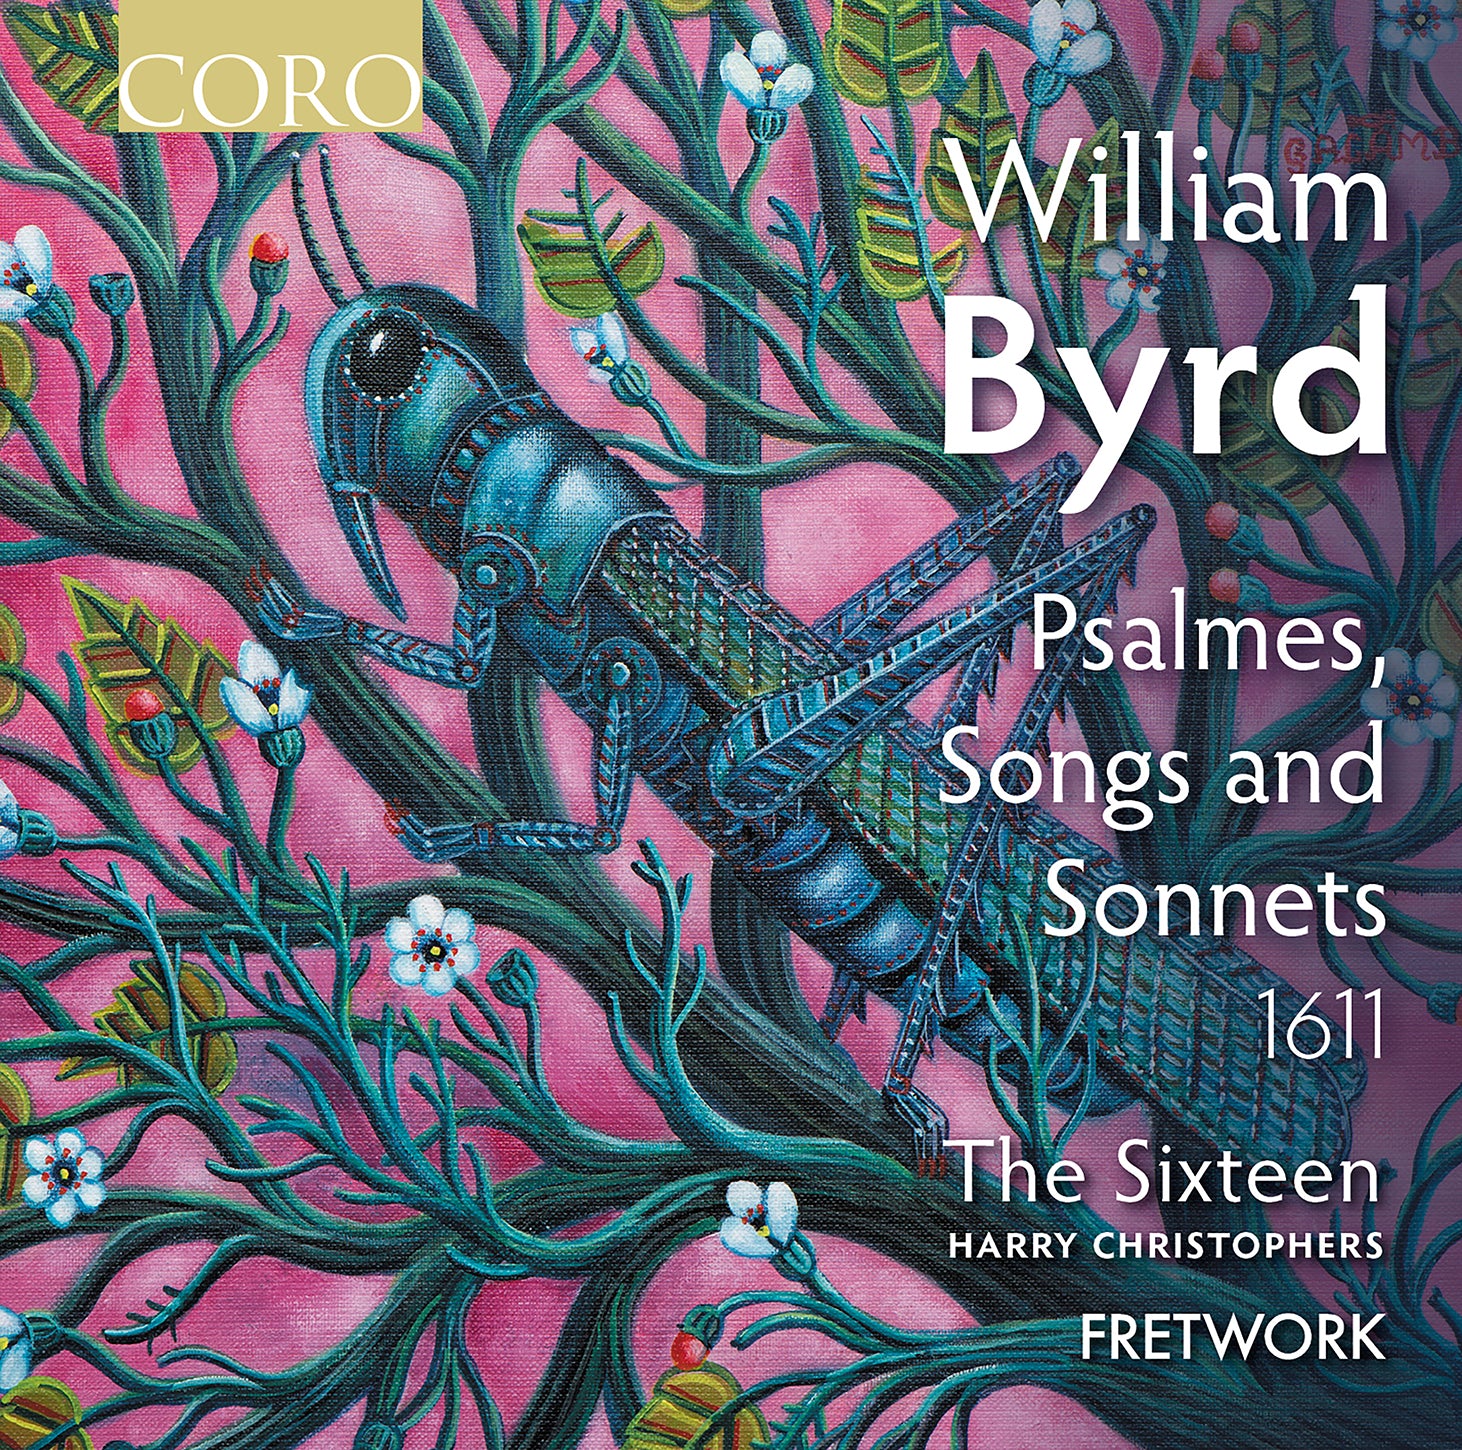 Byrd: Psalmes, Songs & Sonnets (1611) / The Sixteen, Fretwork